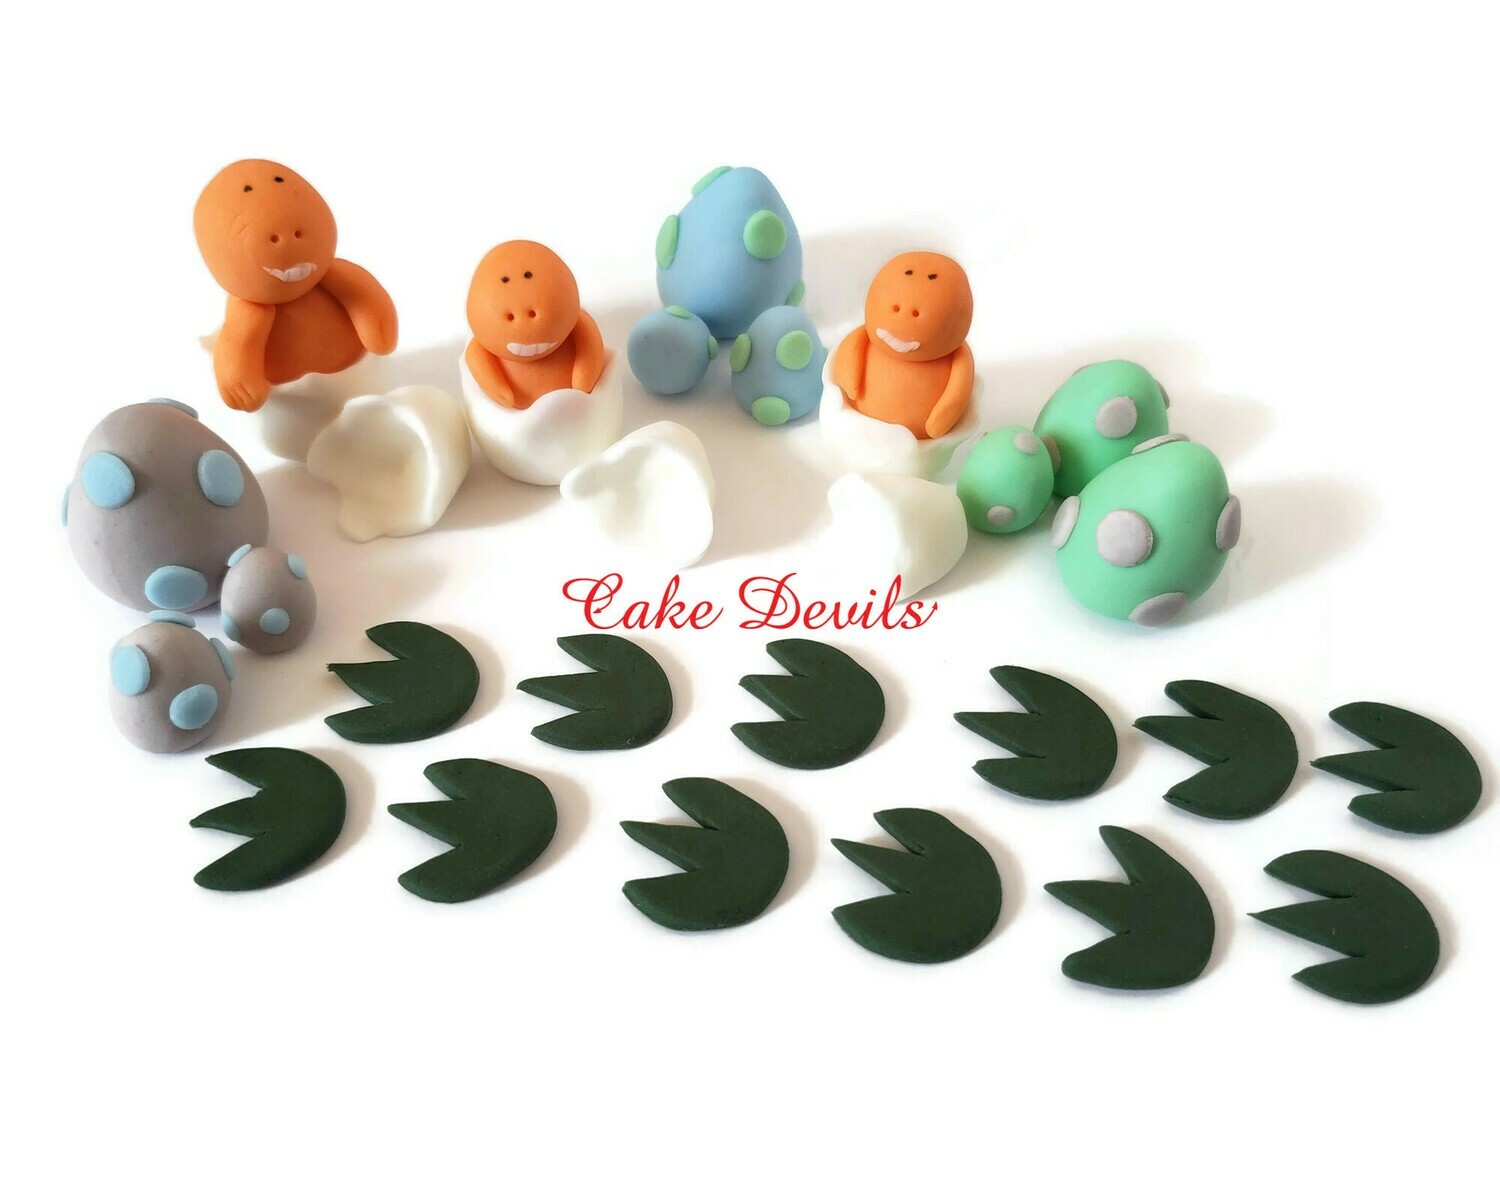 Fondant Hatching Baby Dinosaur Cake Toppers with Dinosaur Eggs and footprints- Great for a baby shower or birthday cake